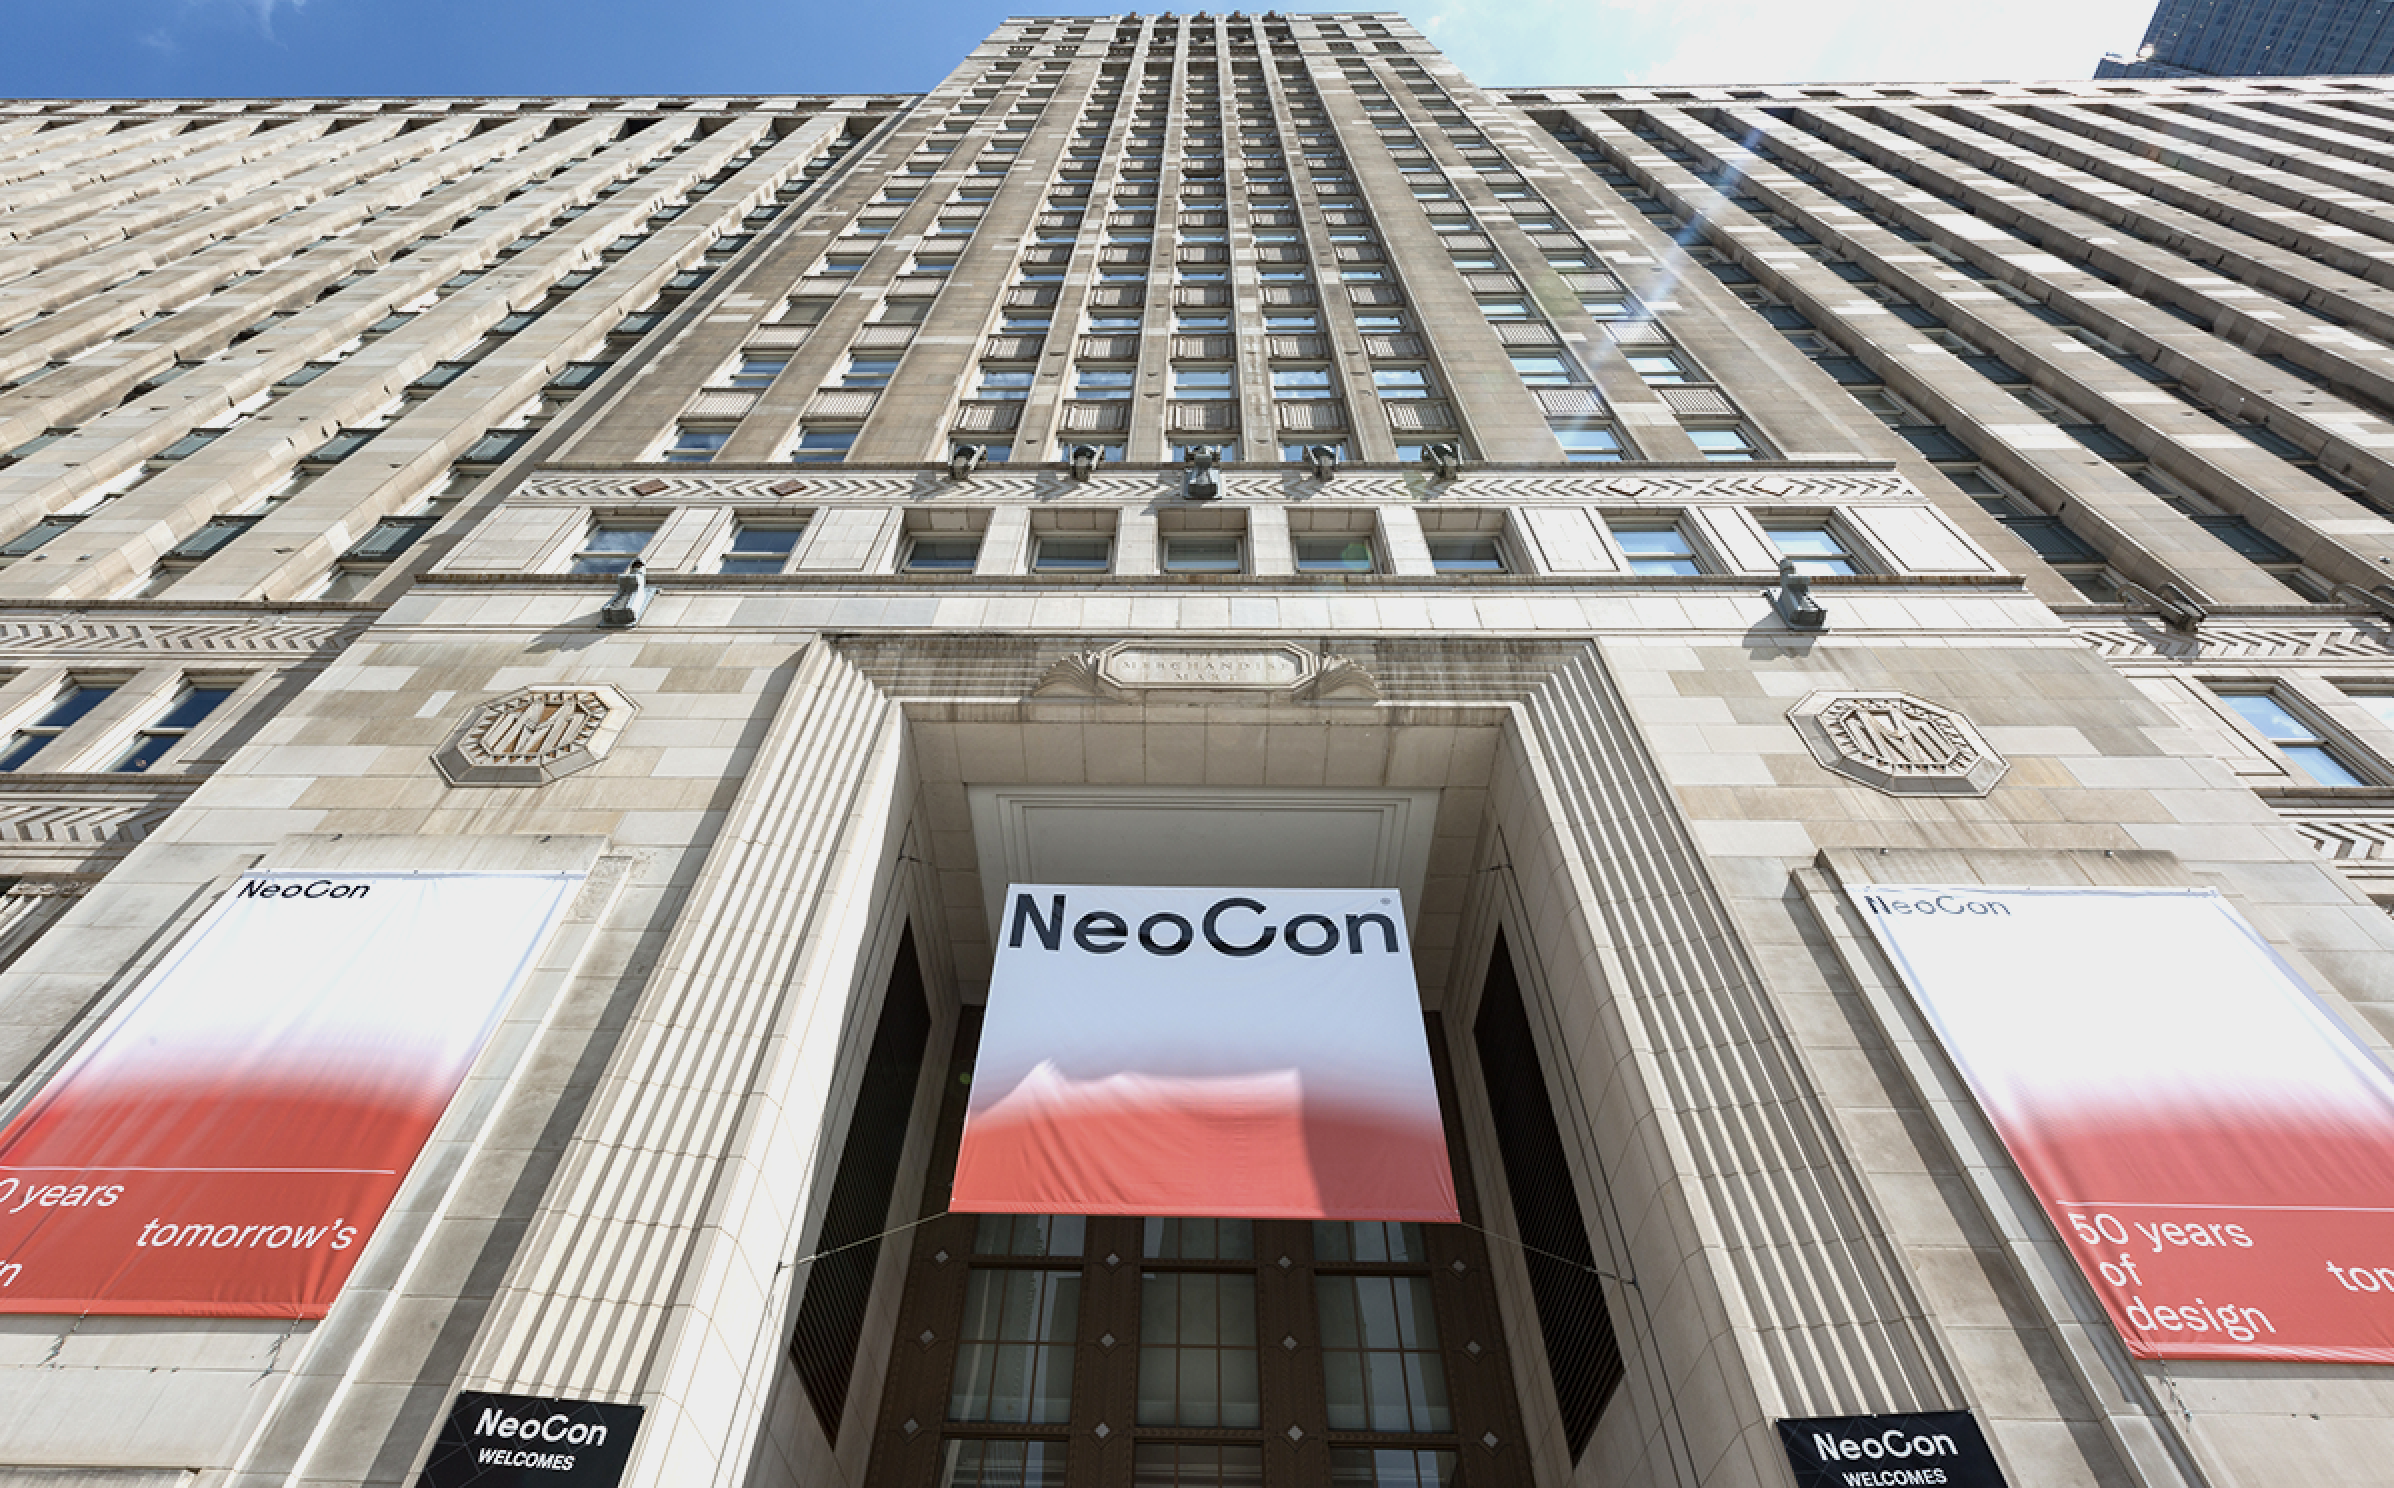 What you need to know before NeoCon 2019